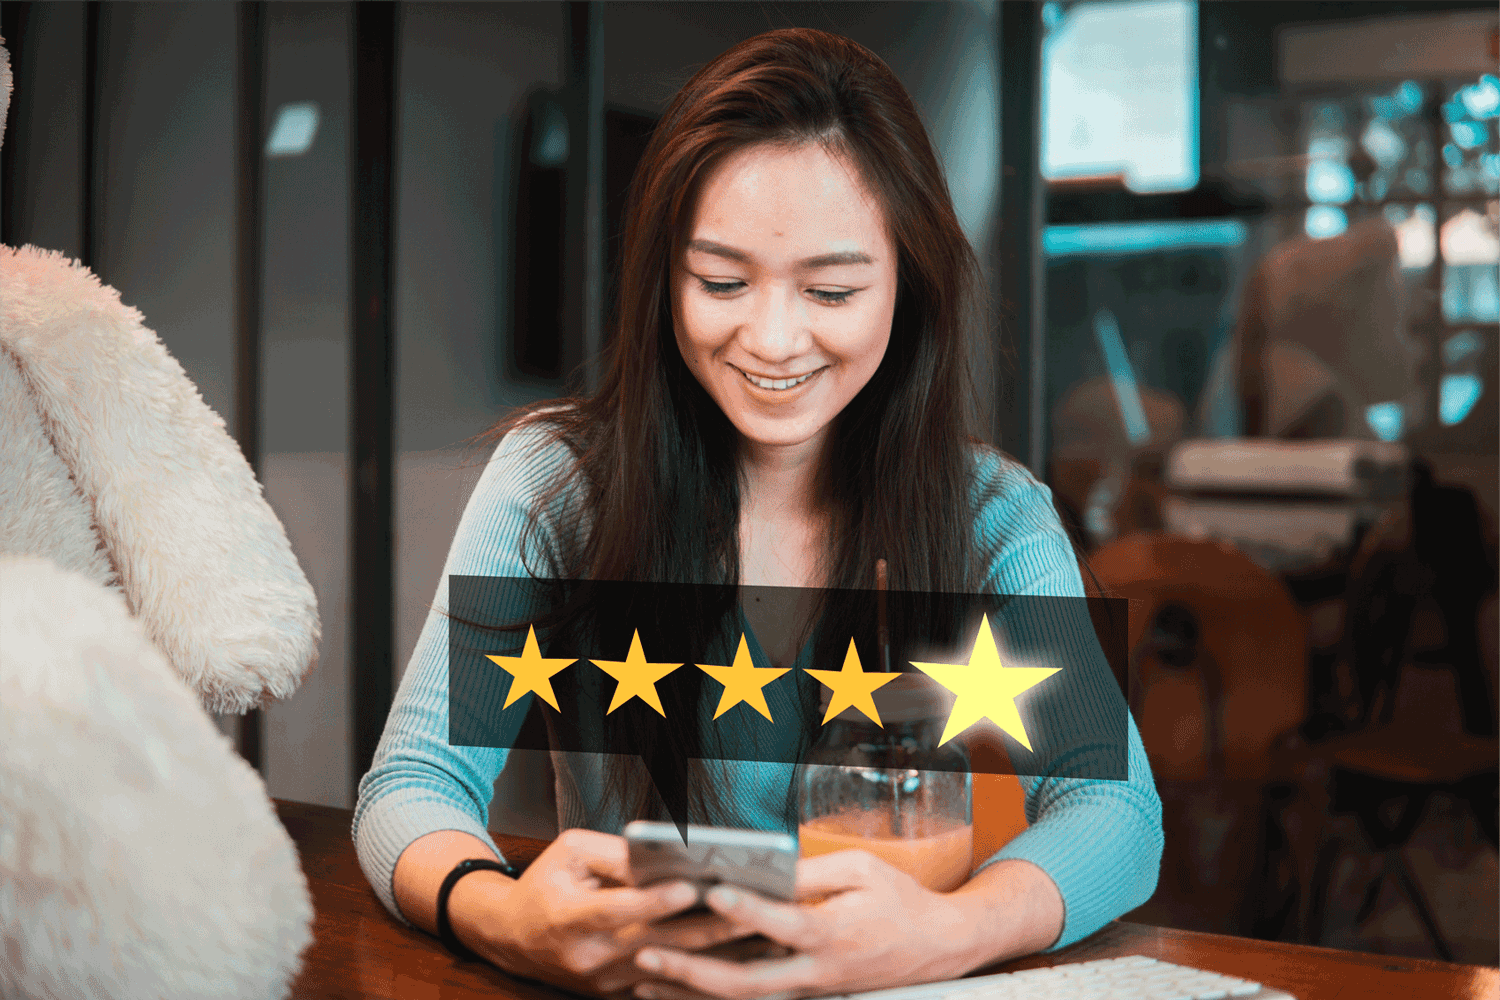 A woman is holding a phone, smiling, with a 5-star rating icon in front of her